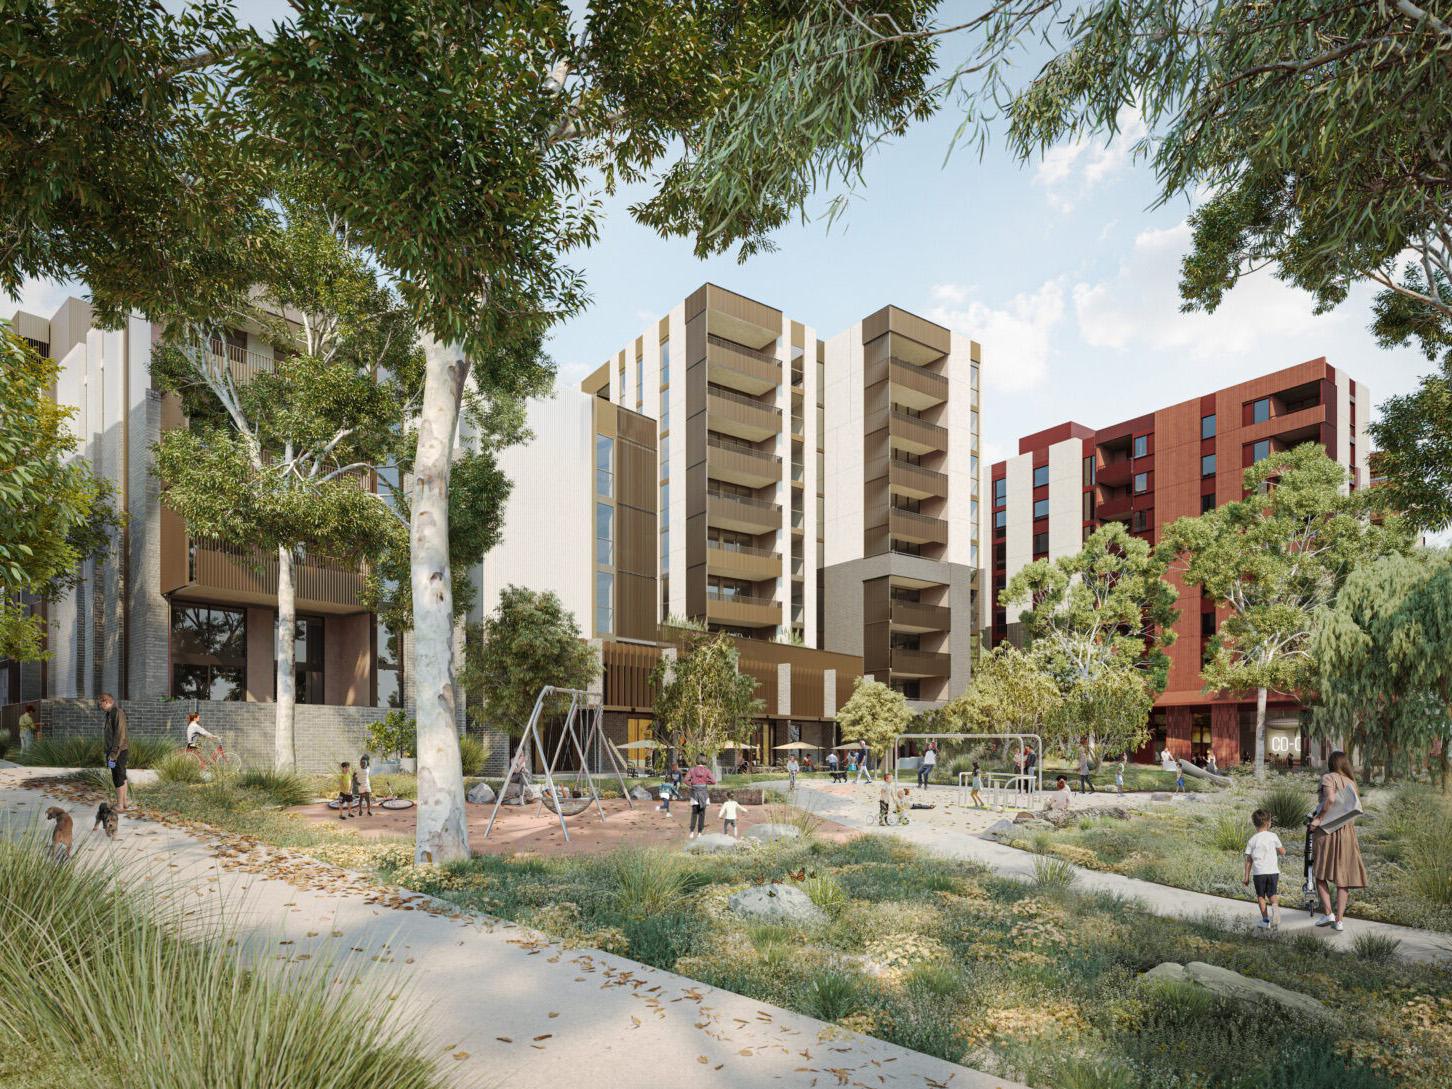 Invesis makes its first social and affordable housing investment in Australia